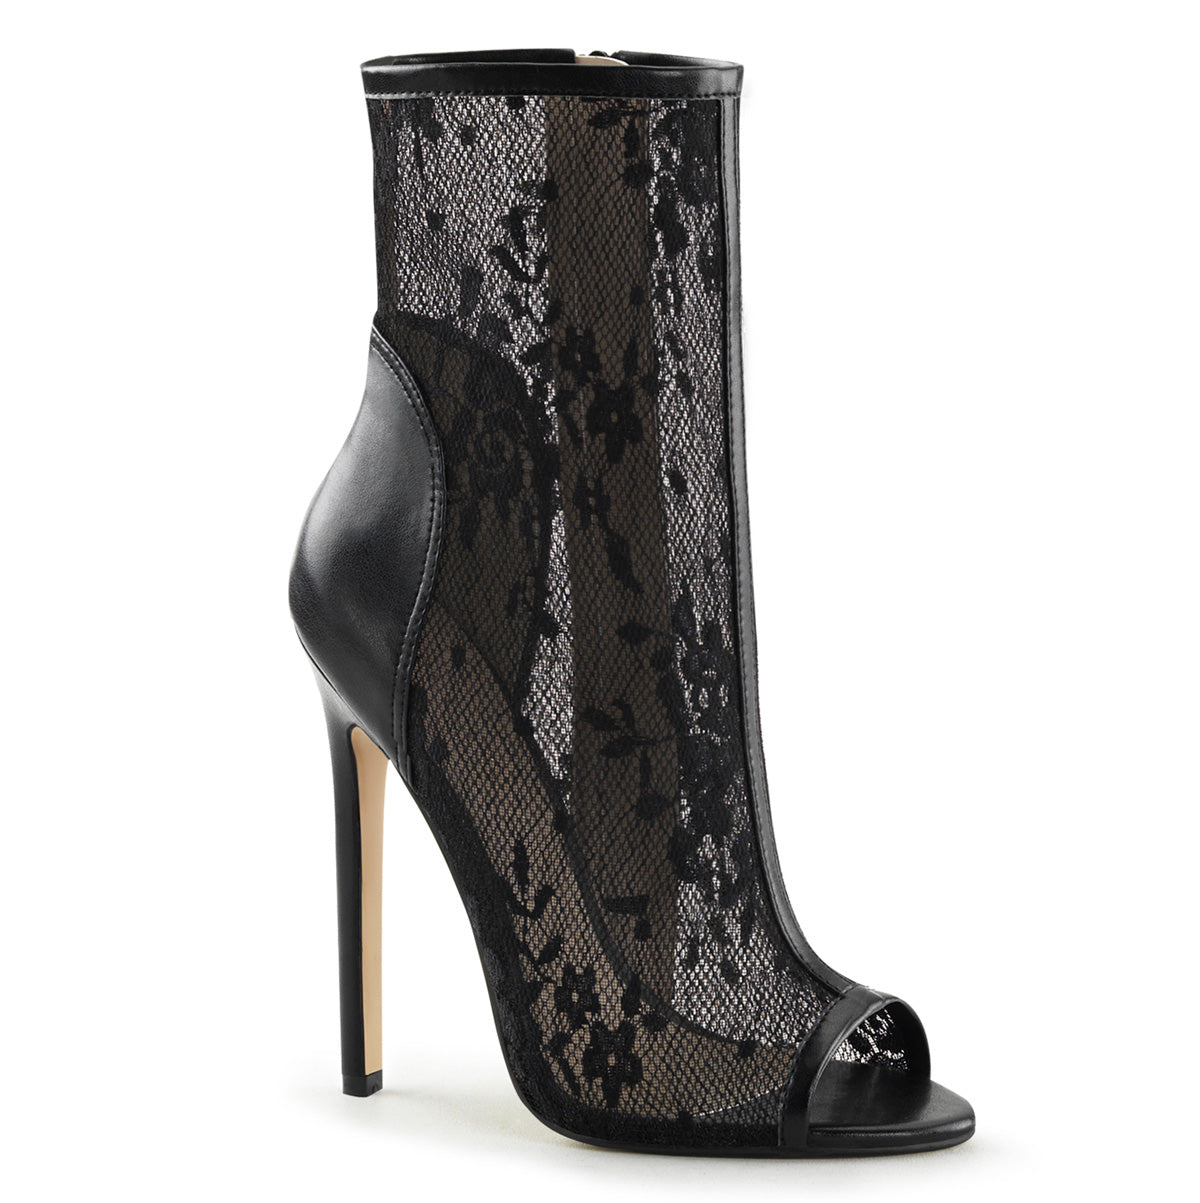 Fabulicious Womens Ankle Boots SEXY-1008 Blk Pu-Lace